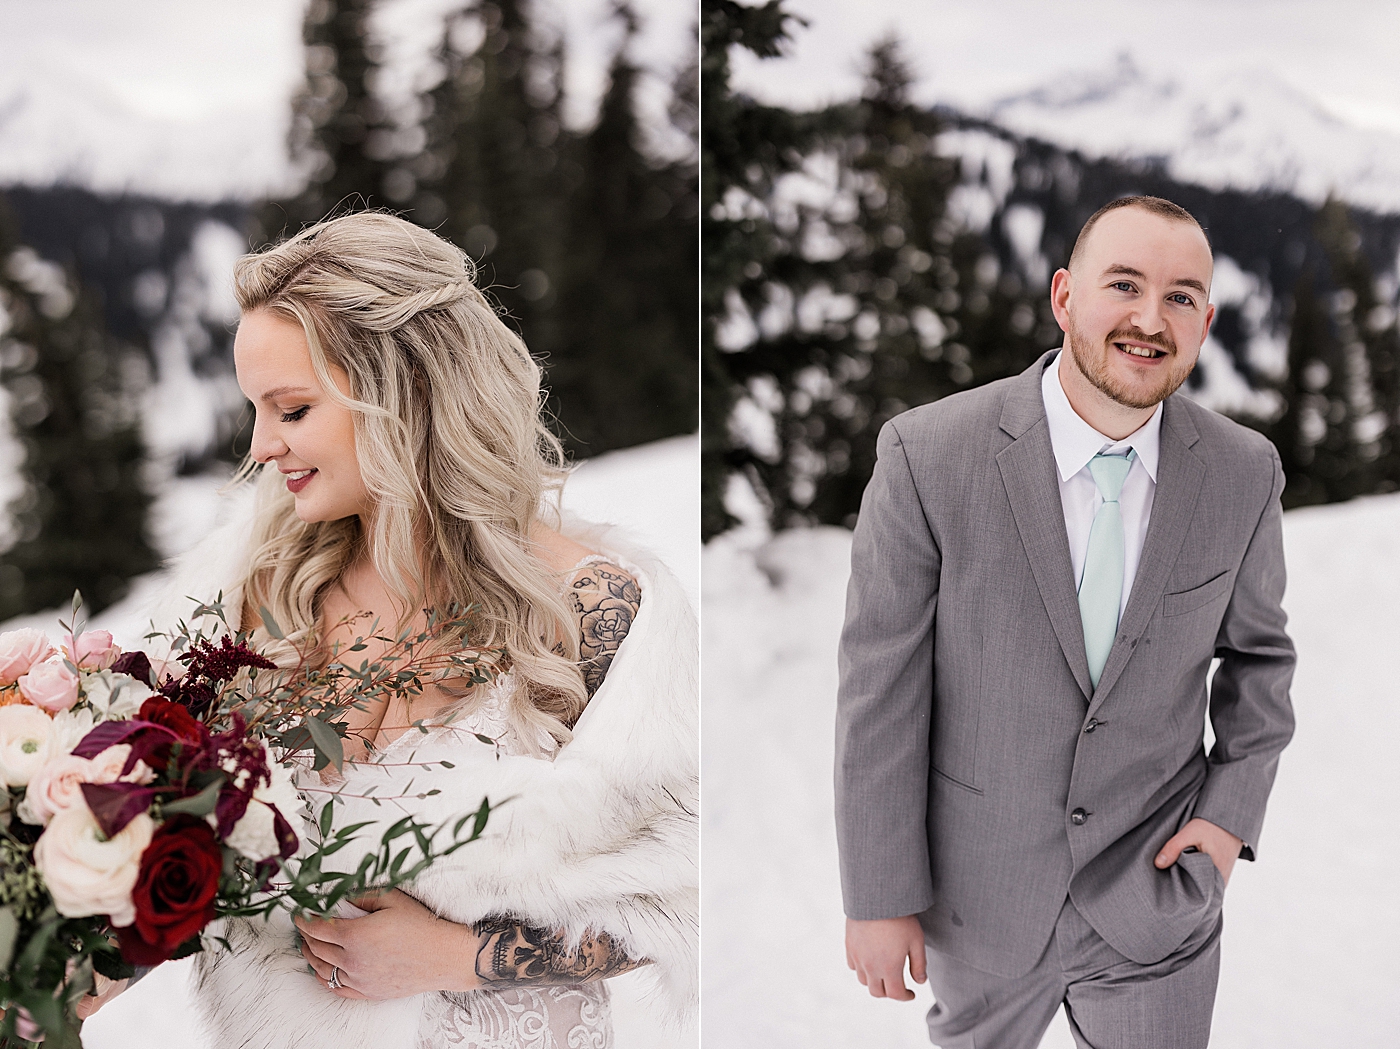 Bride and groom photos by Megan Montalvo Photography.